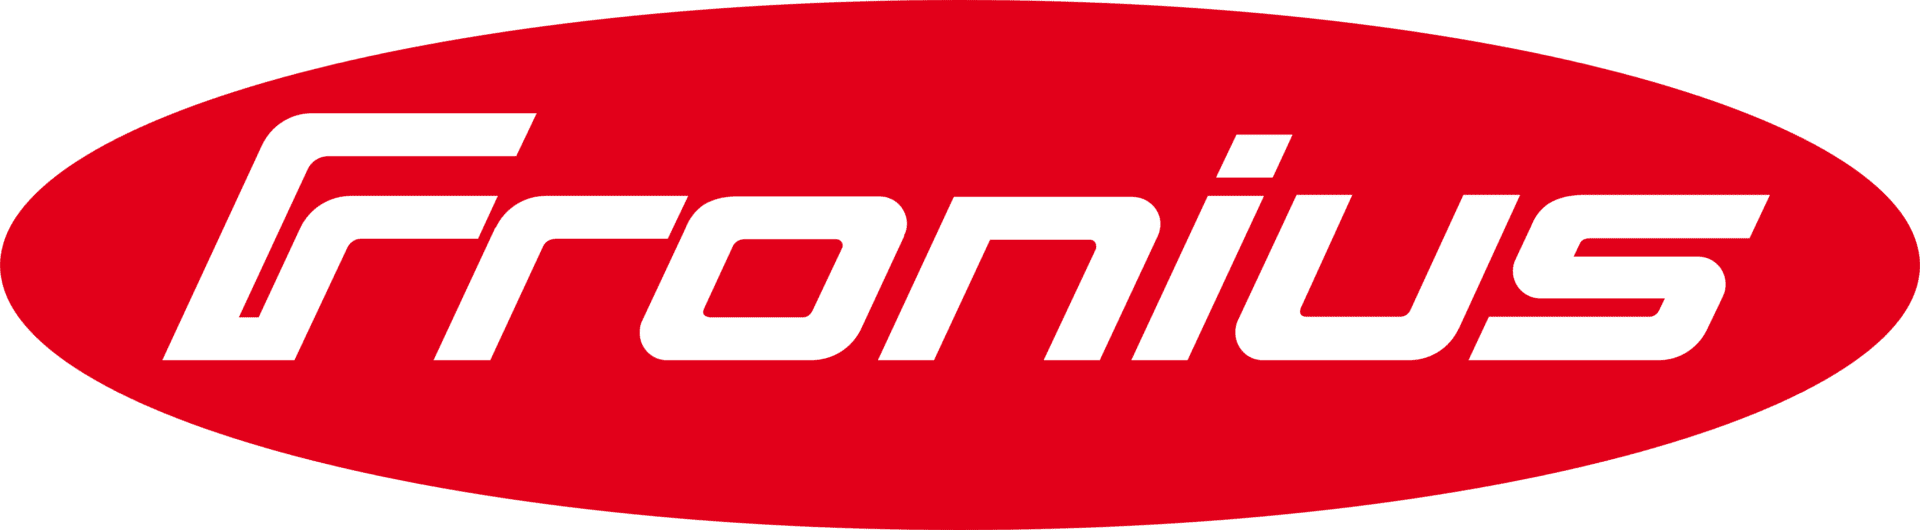 A red and white logo for sonic.